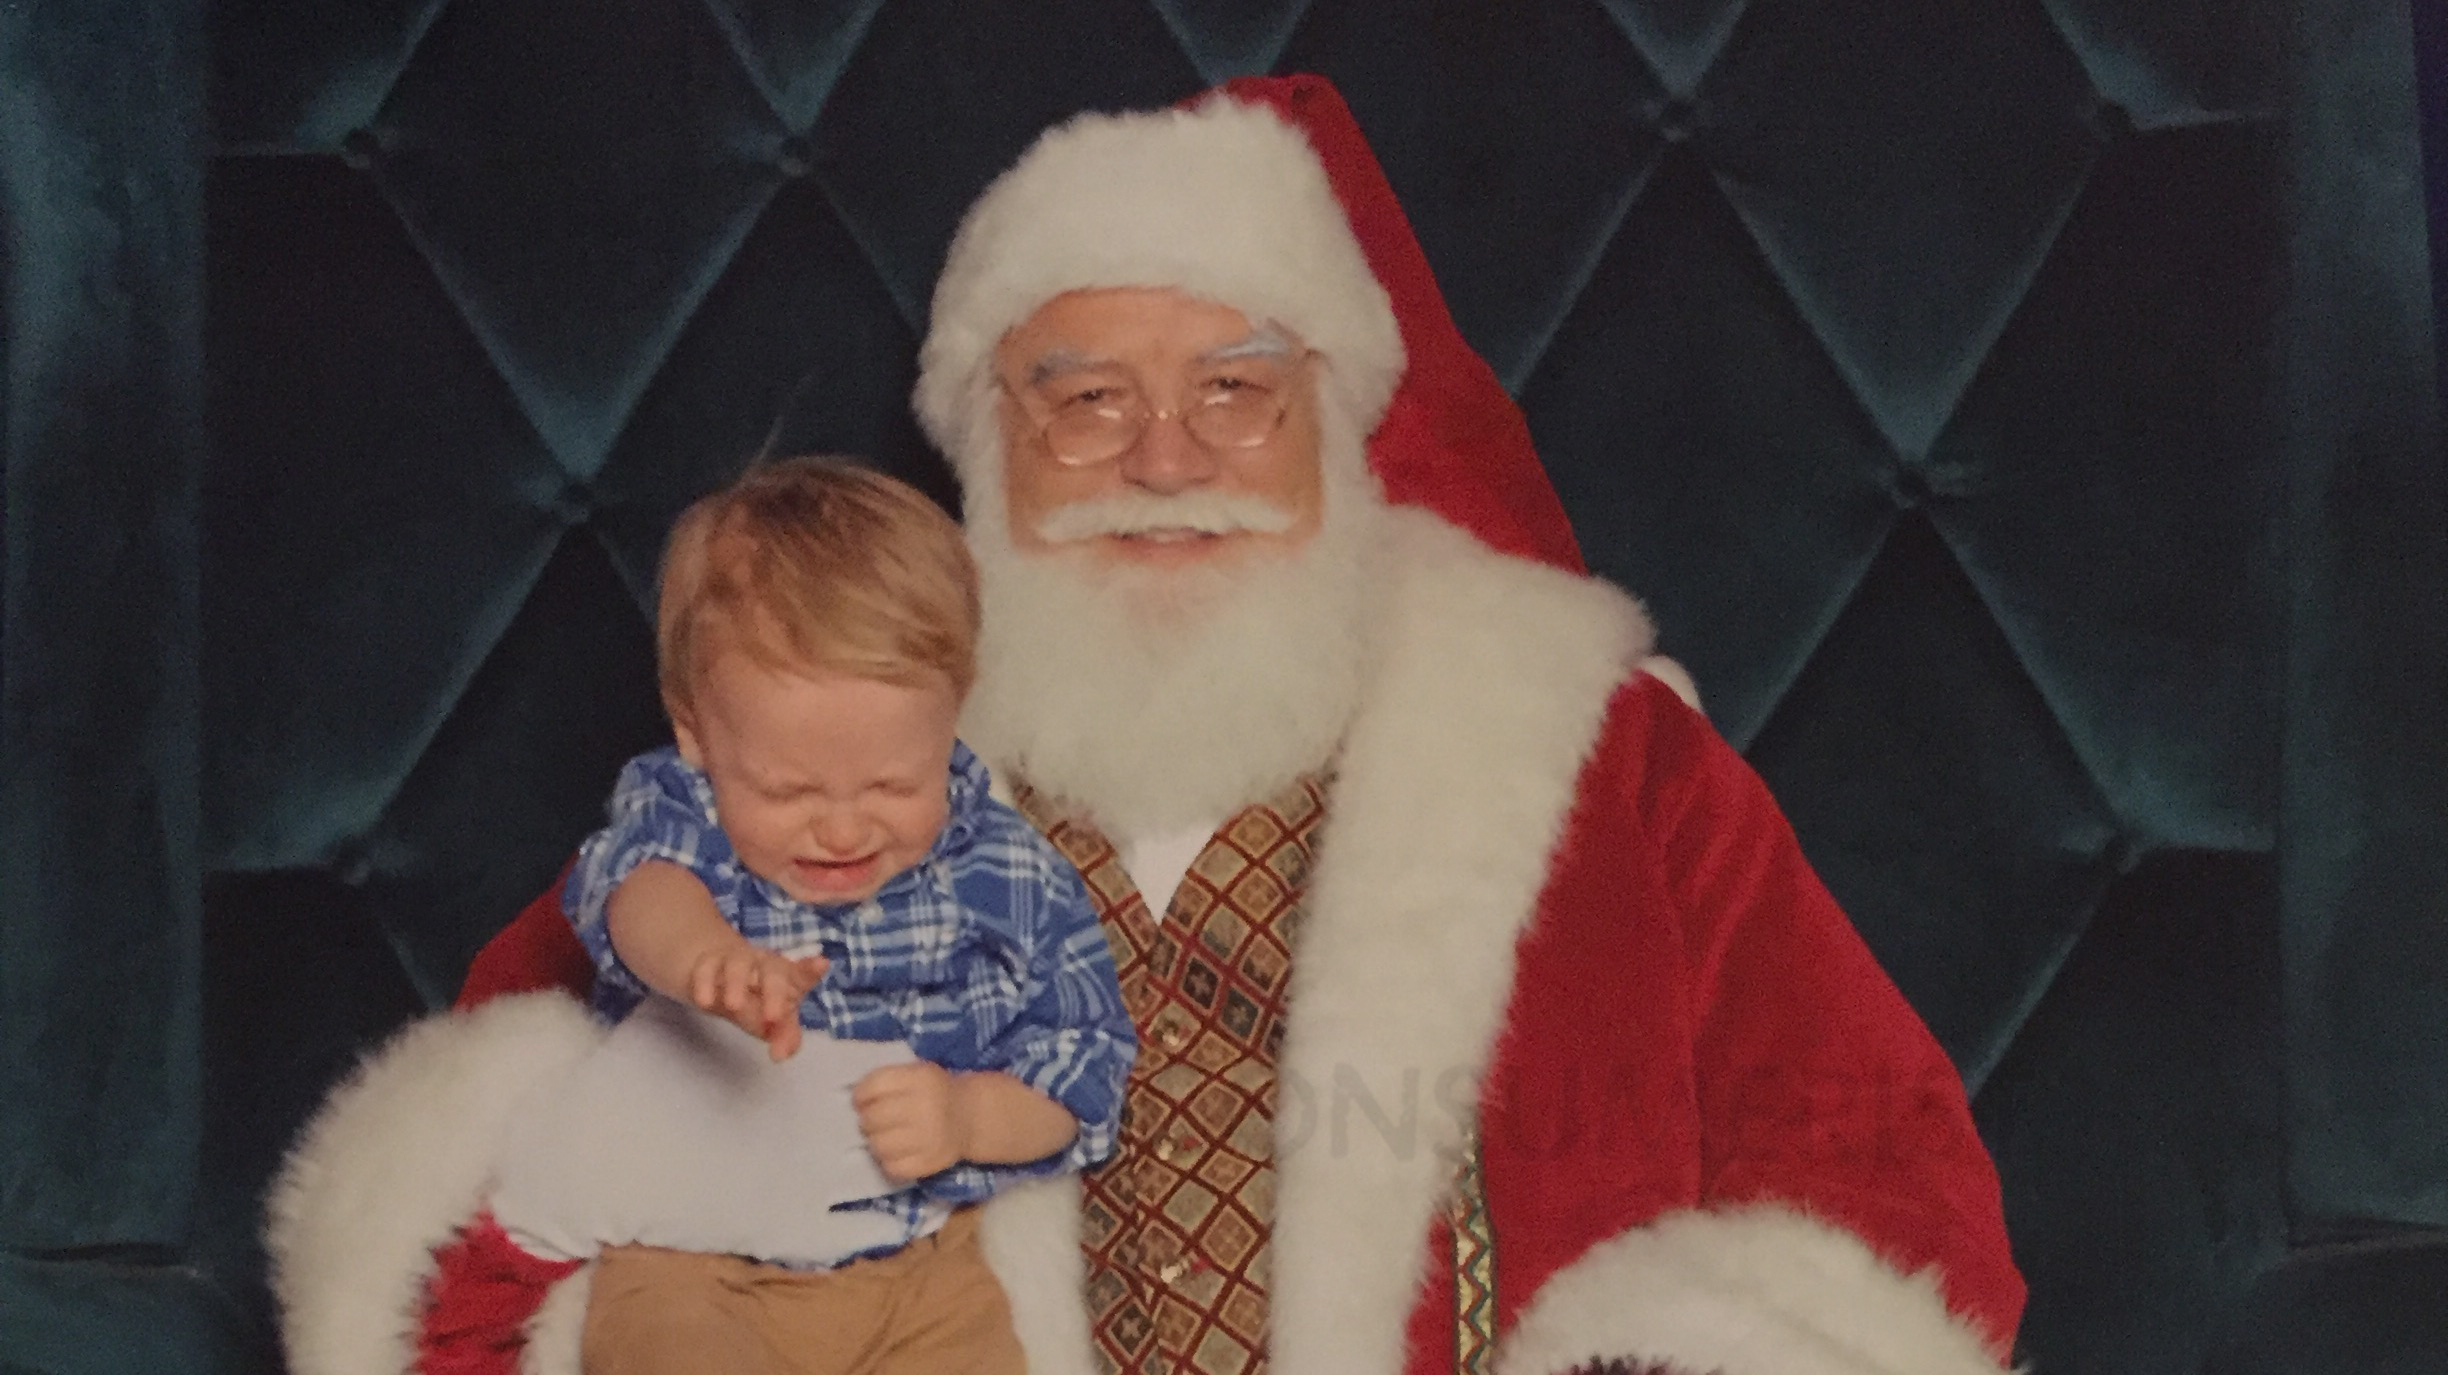 ’Tis The Season: We Want Photos Of Your Kid’s Mall Santa Claus Nightmare